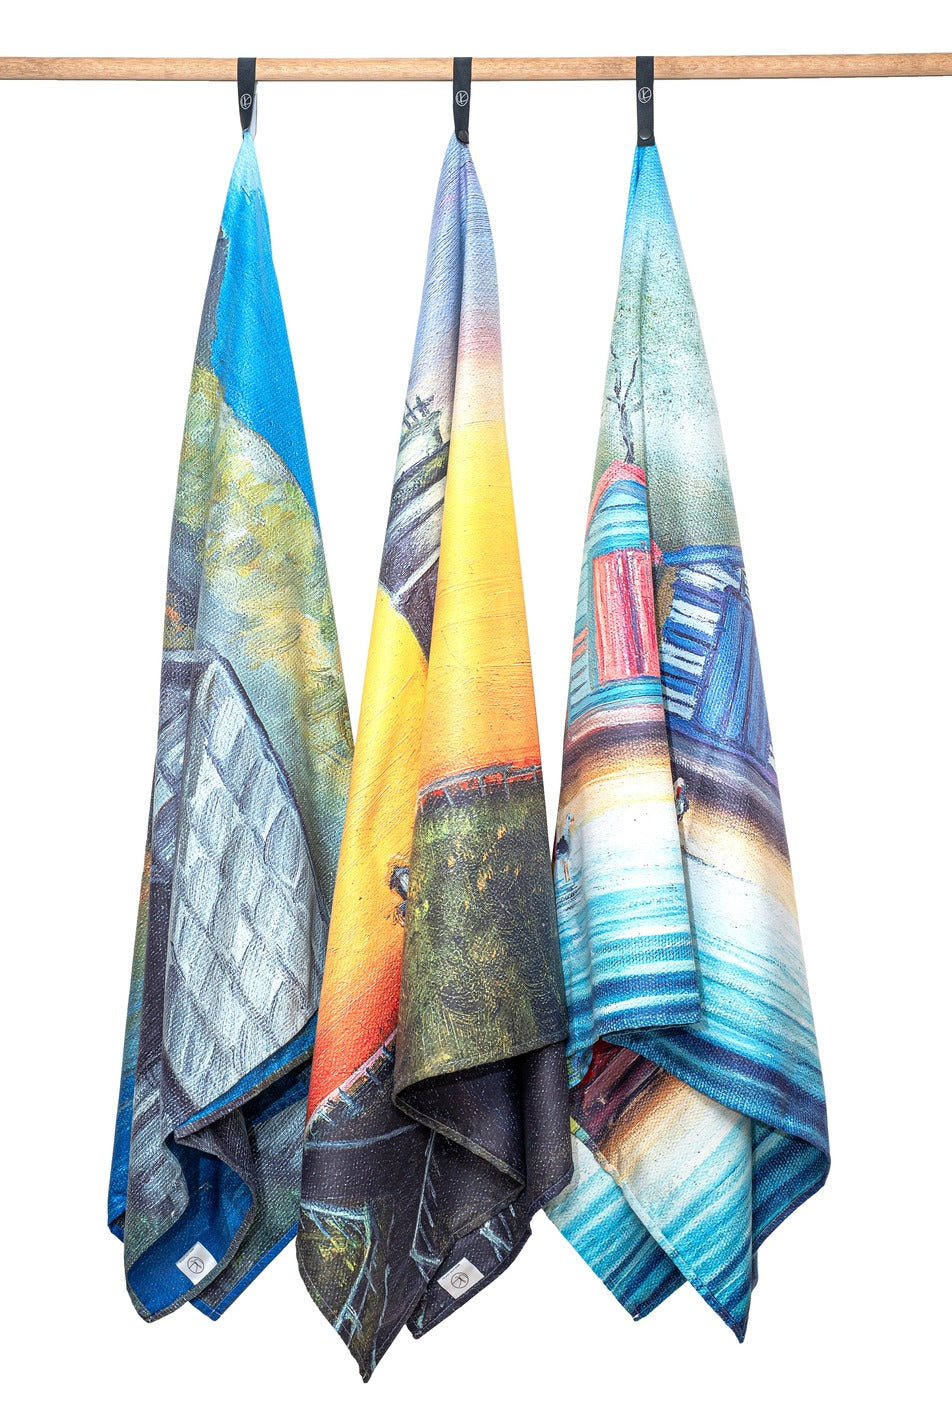 Cradle Mountain, Byron Bay and Brighton beach microfibre artistic towels. they are large size, 170cm x 95cm, soft touch, compact and sand free beach towel. An Aussie-inspired art showcasing magnificent landmarks and the Aussie lifestyle